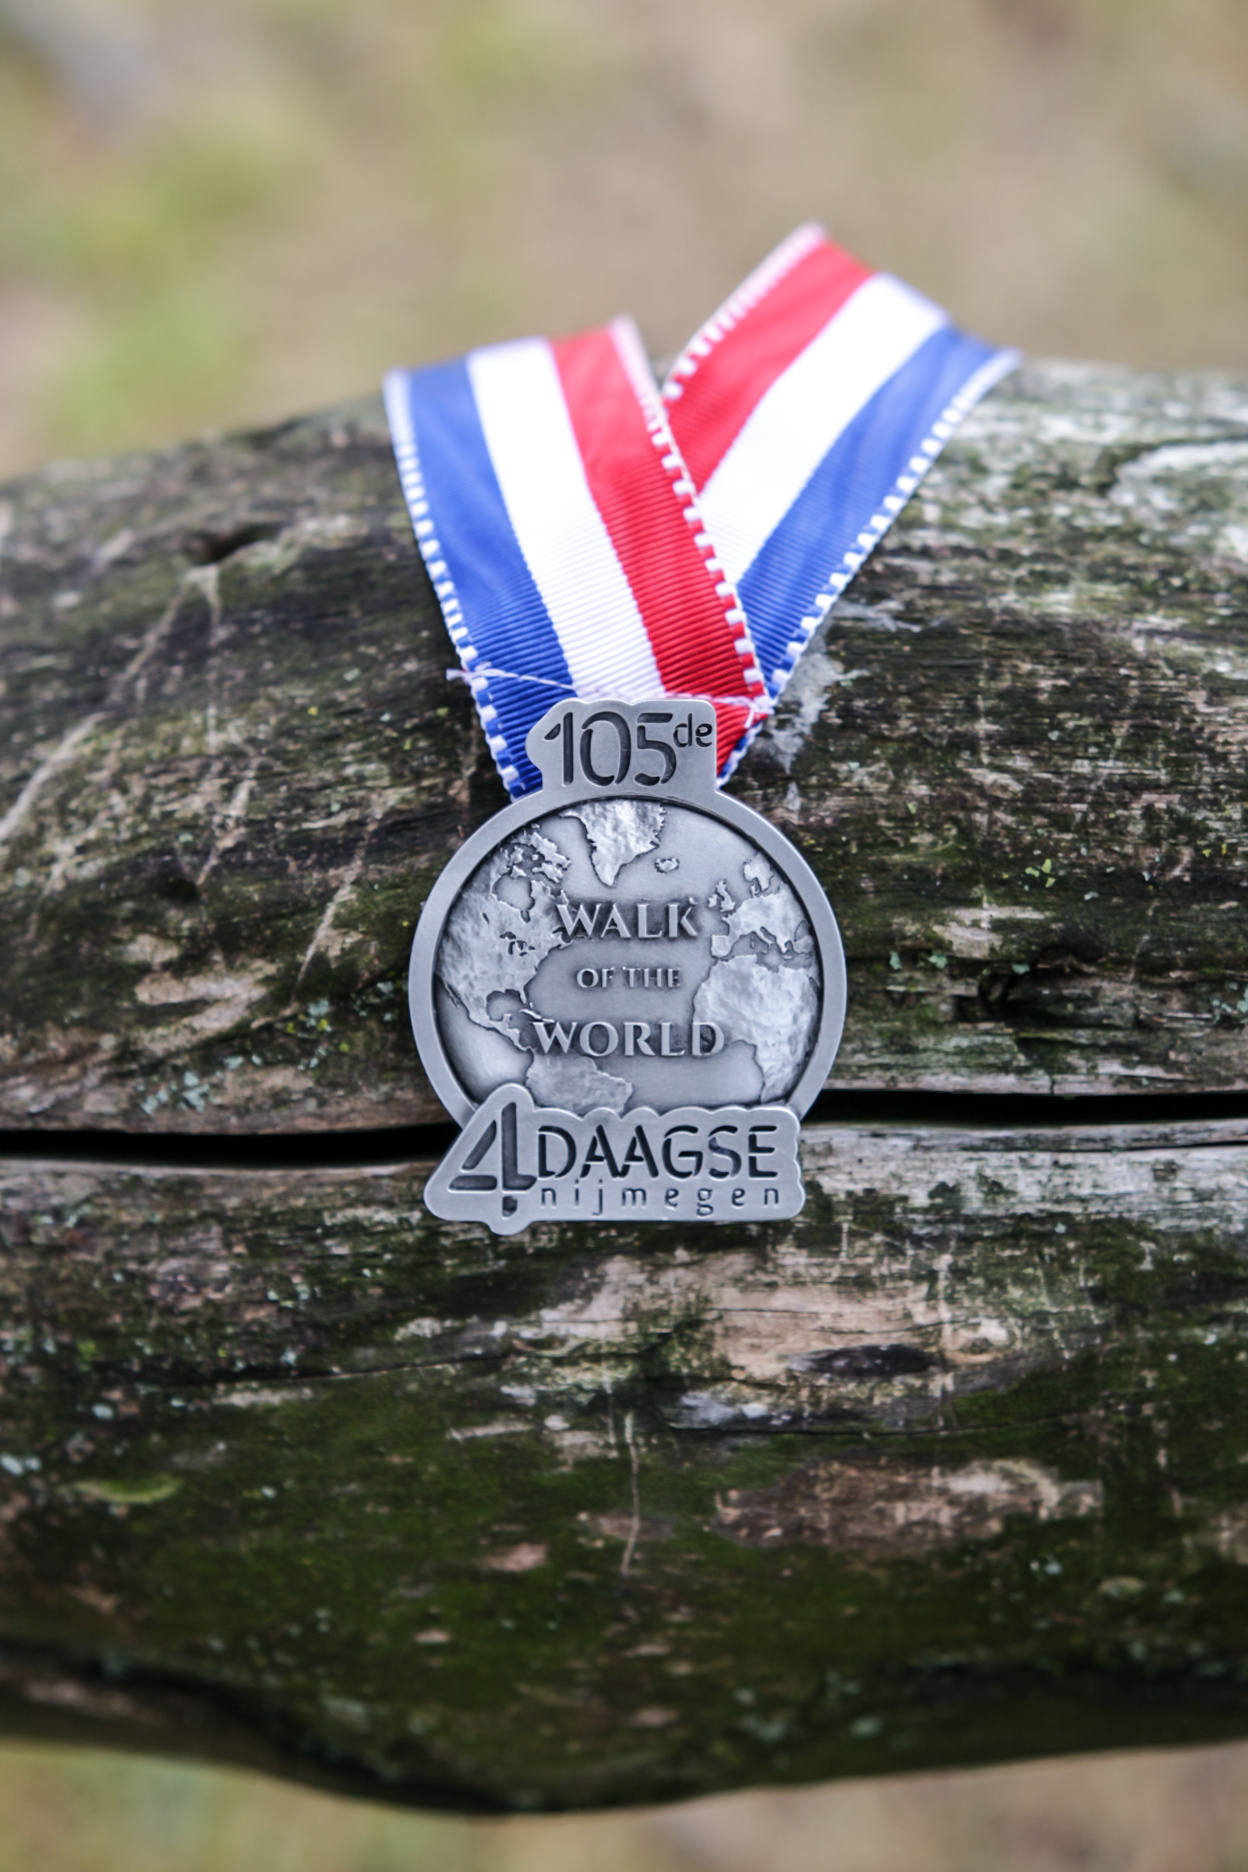 DTR Four Days Marches edition medal on ribbon